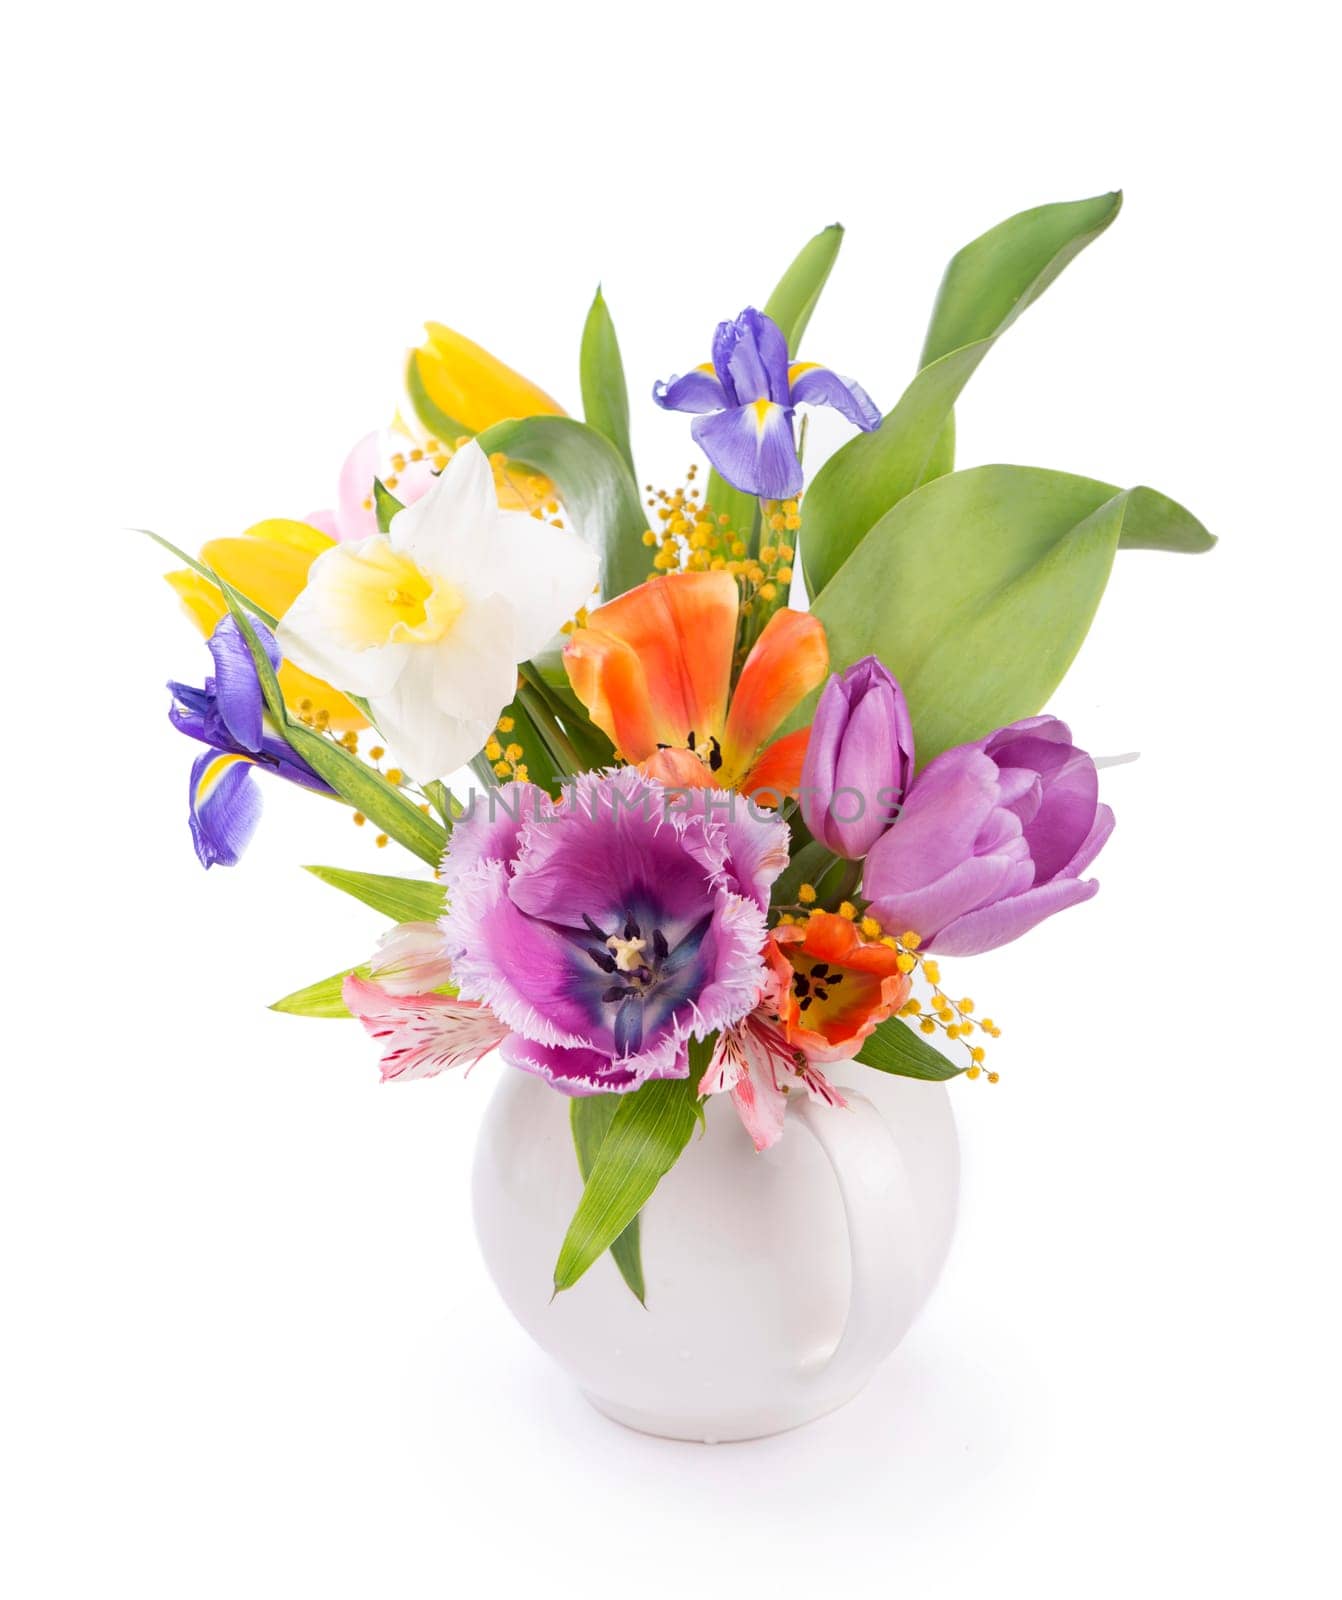 spring flowers, daffodils, tulips, hyacinths, irises and mimosa isolated on a white background by aprilphoto